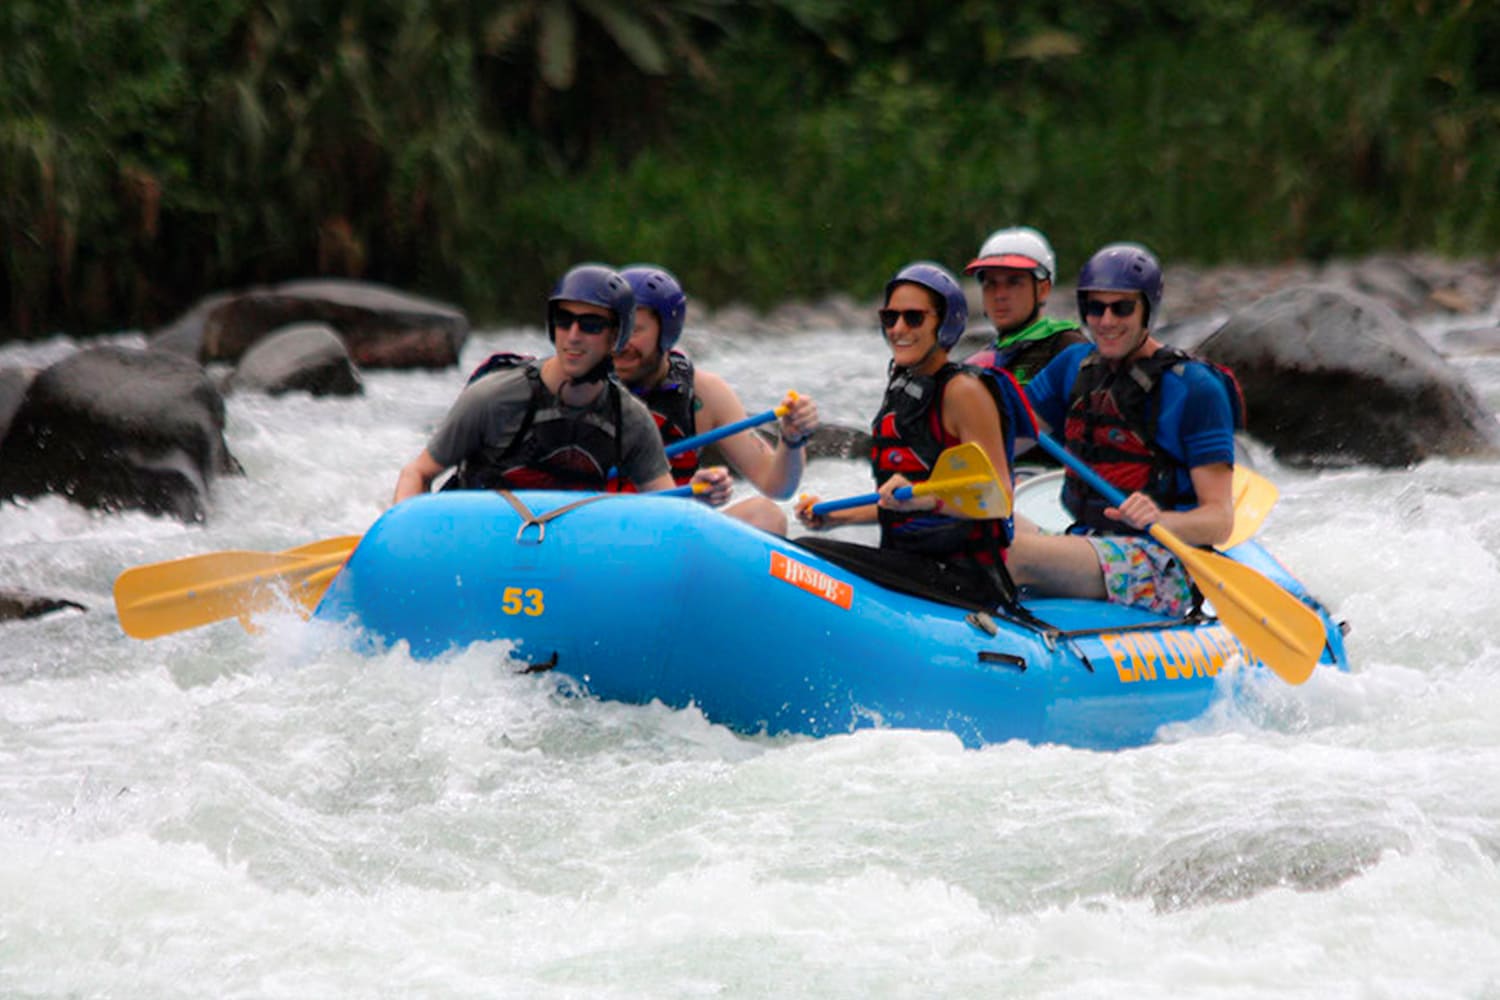 4.- ADVENTURE SPORTS IN CUSCO: BOATING ON THE VILCANOTA RIVER